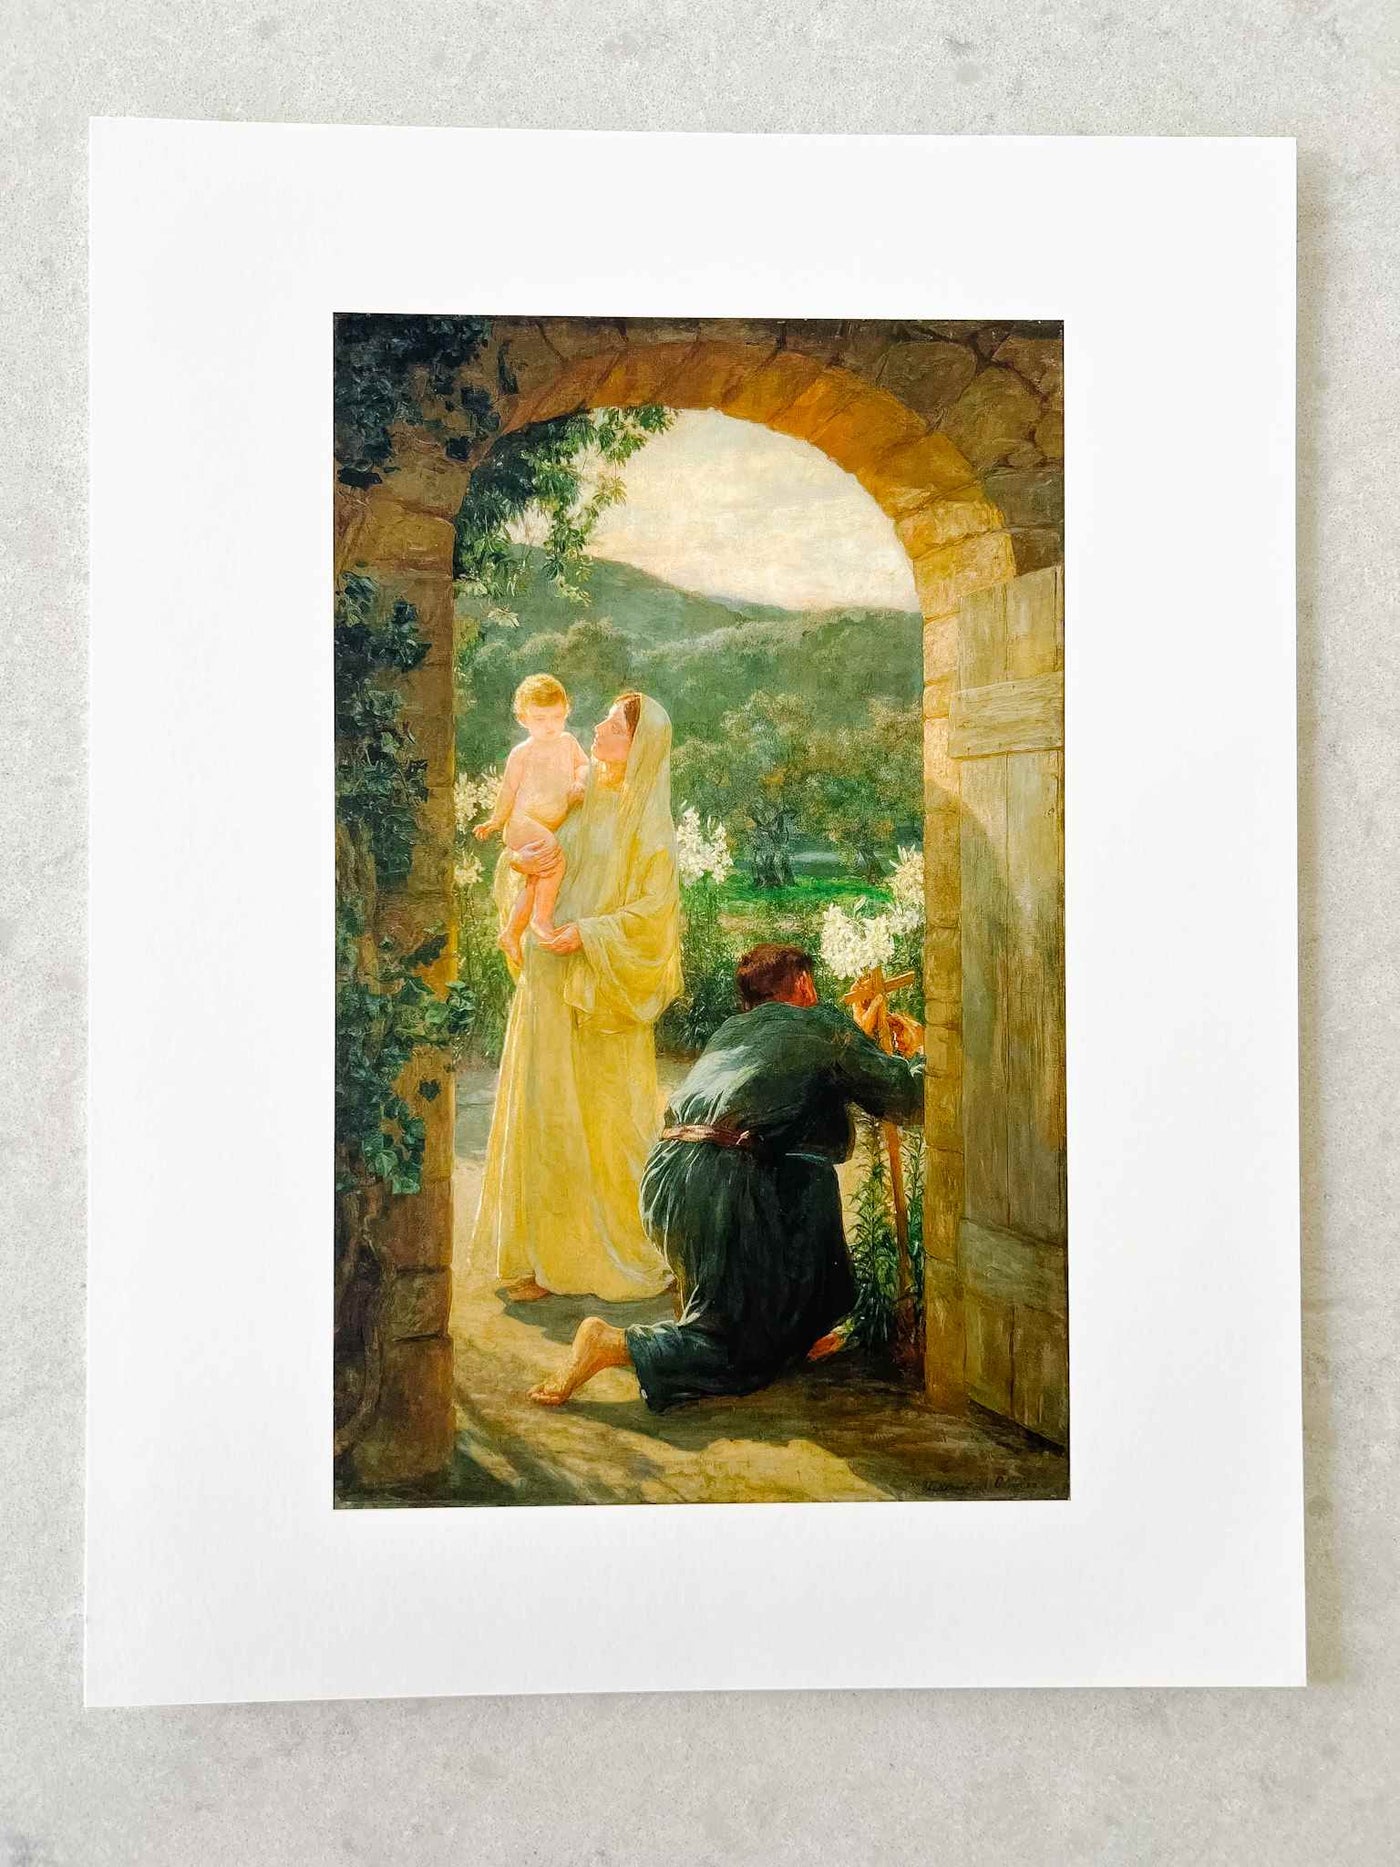 The Holy Family By Their Home - Print